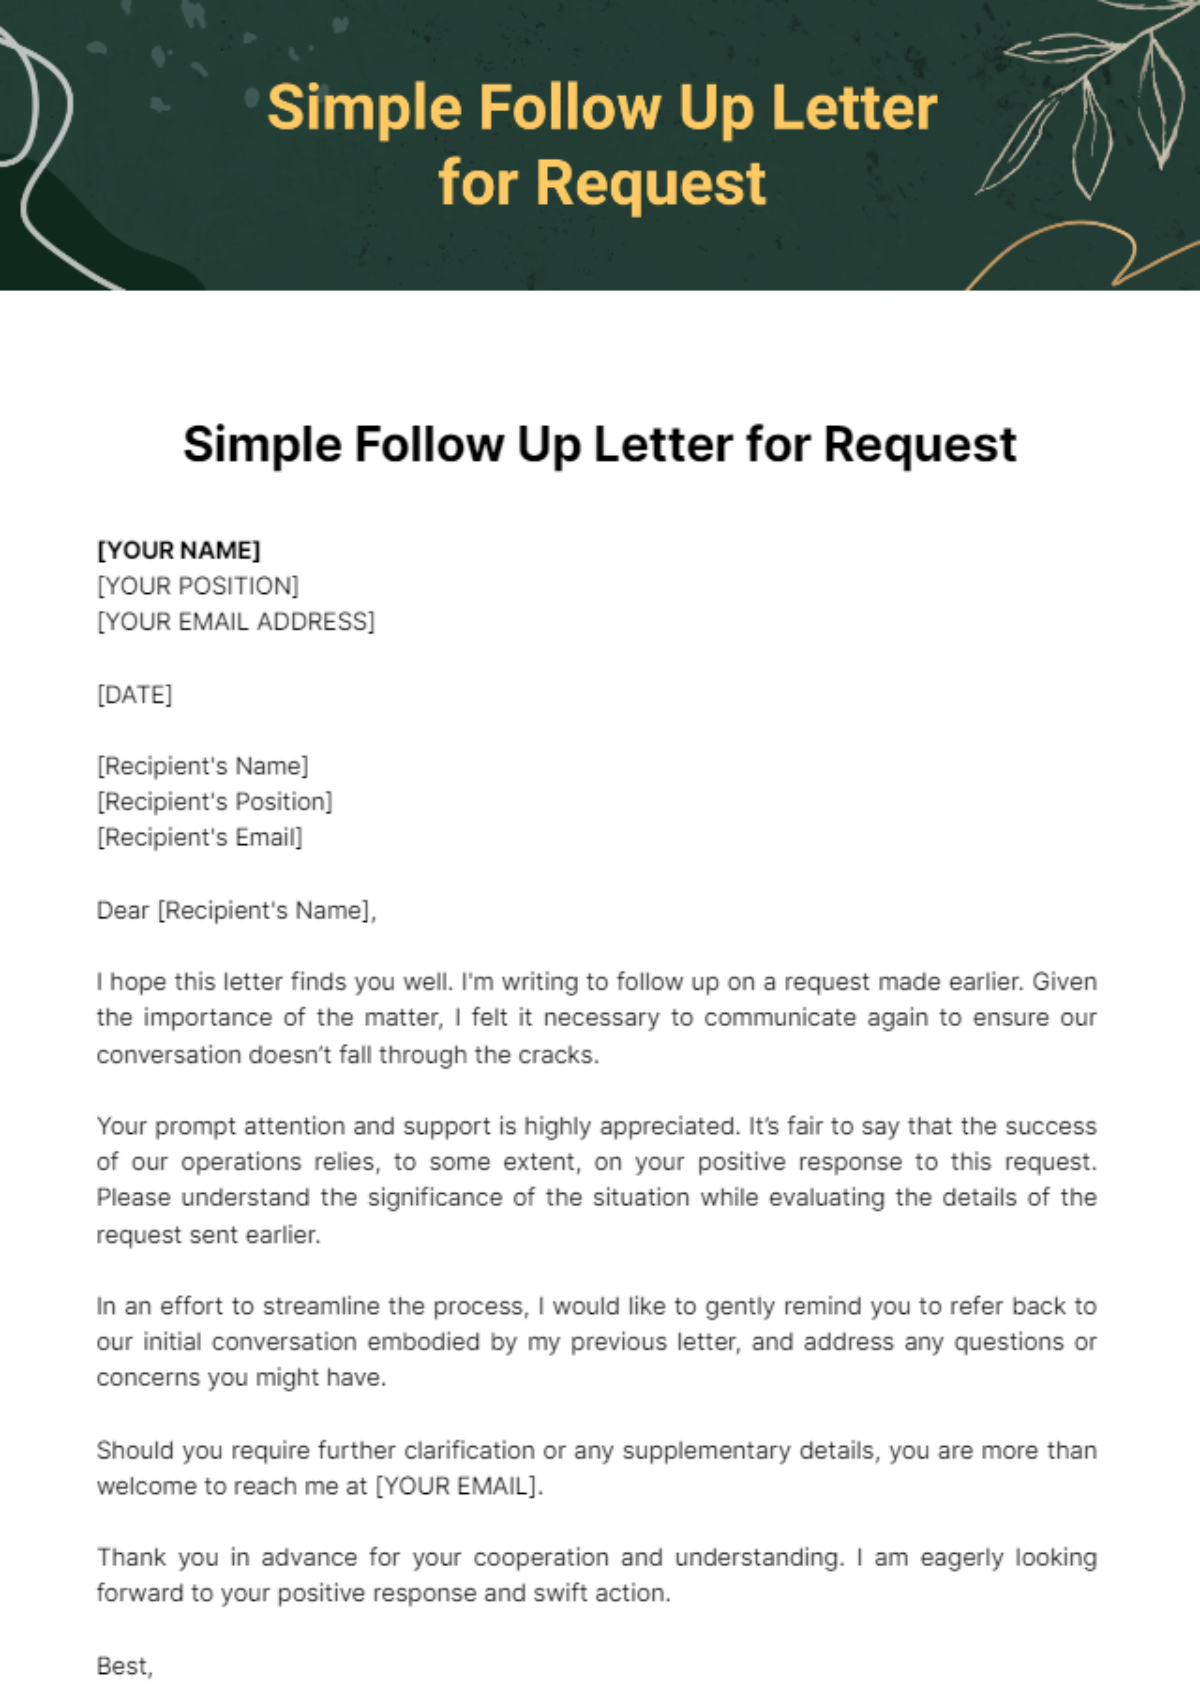 Free Simple Follow Up Letter for Request Template